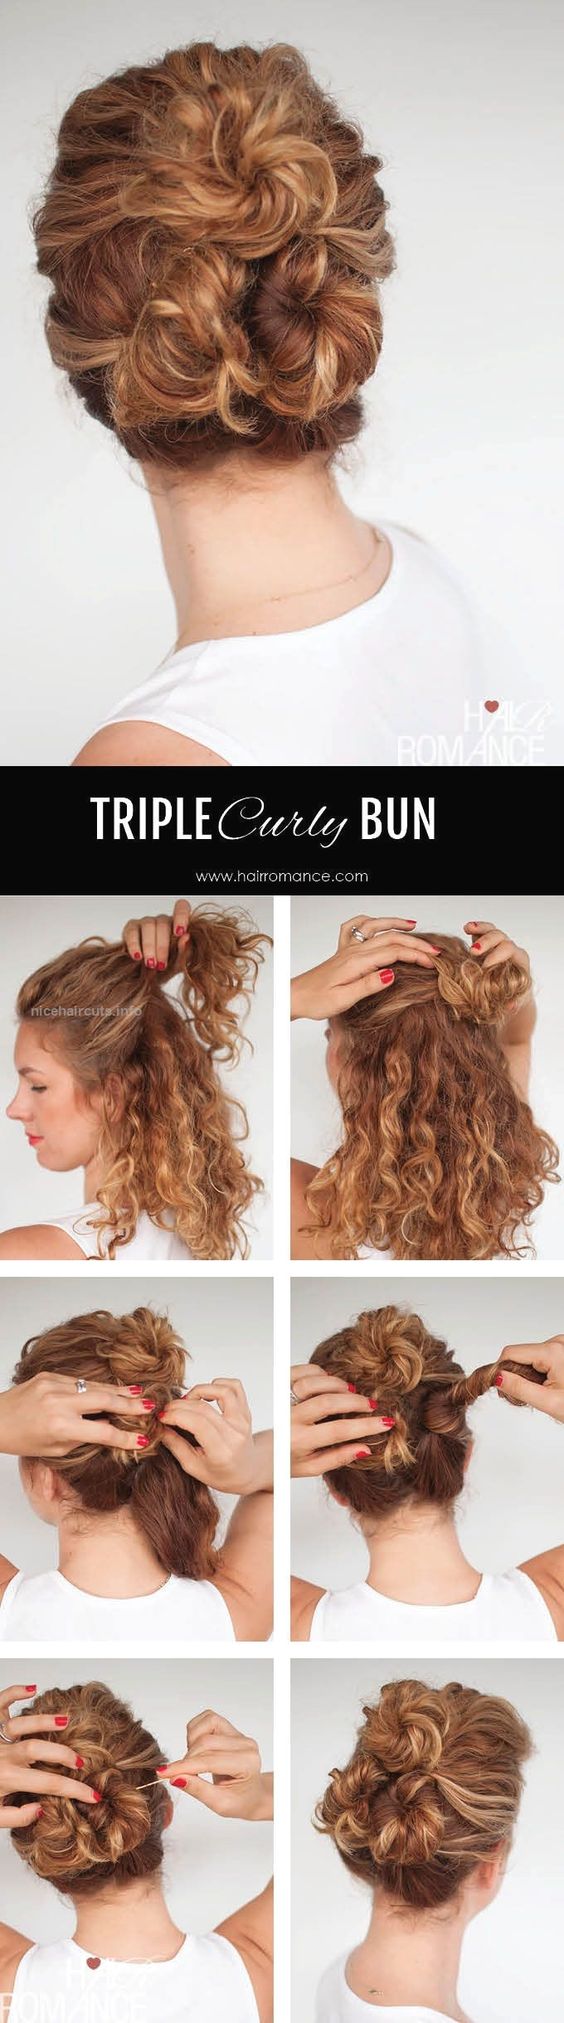 The Tri Curly Bun You Have To Try Today